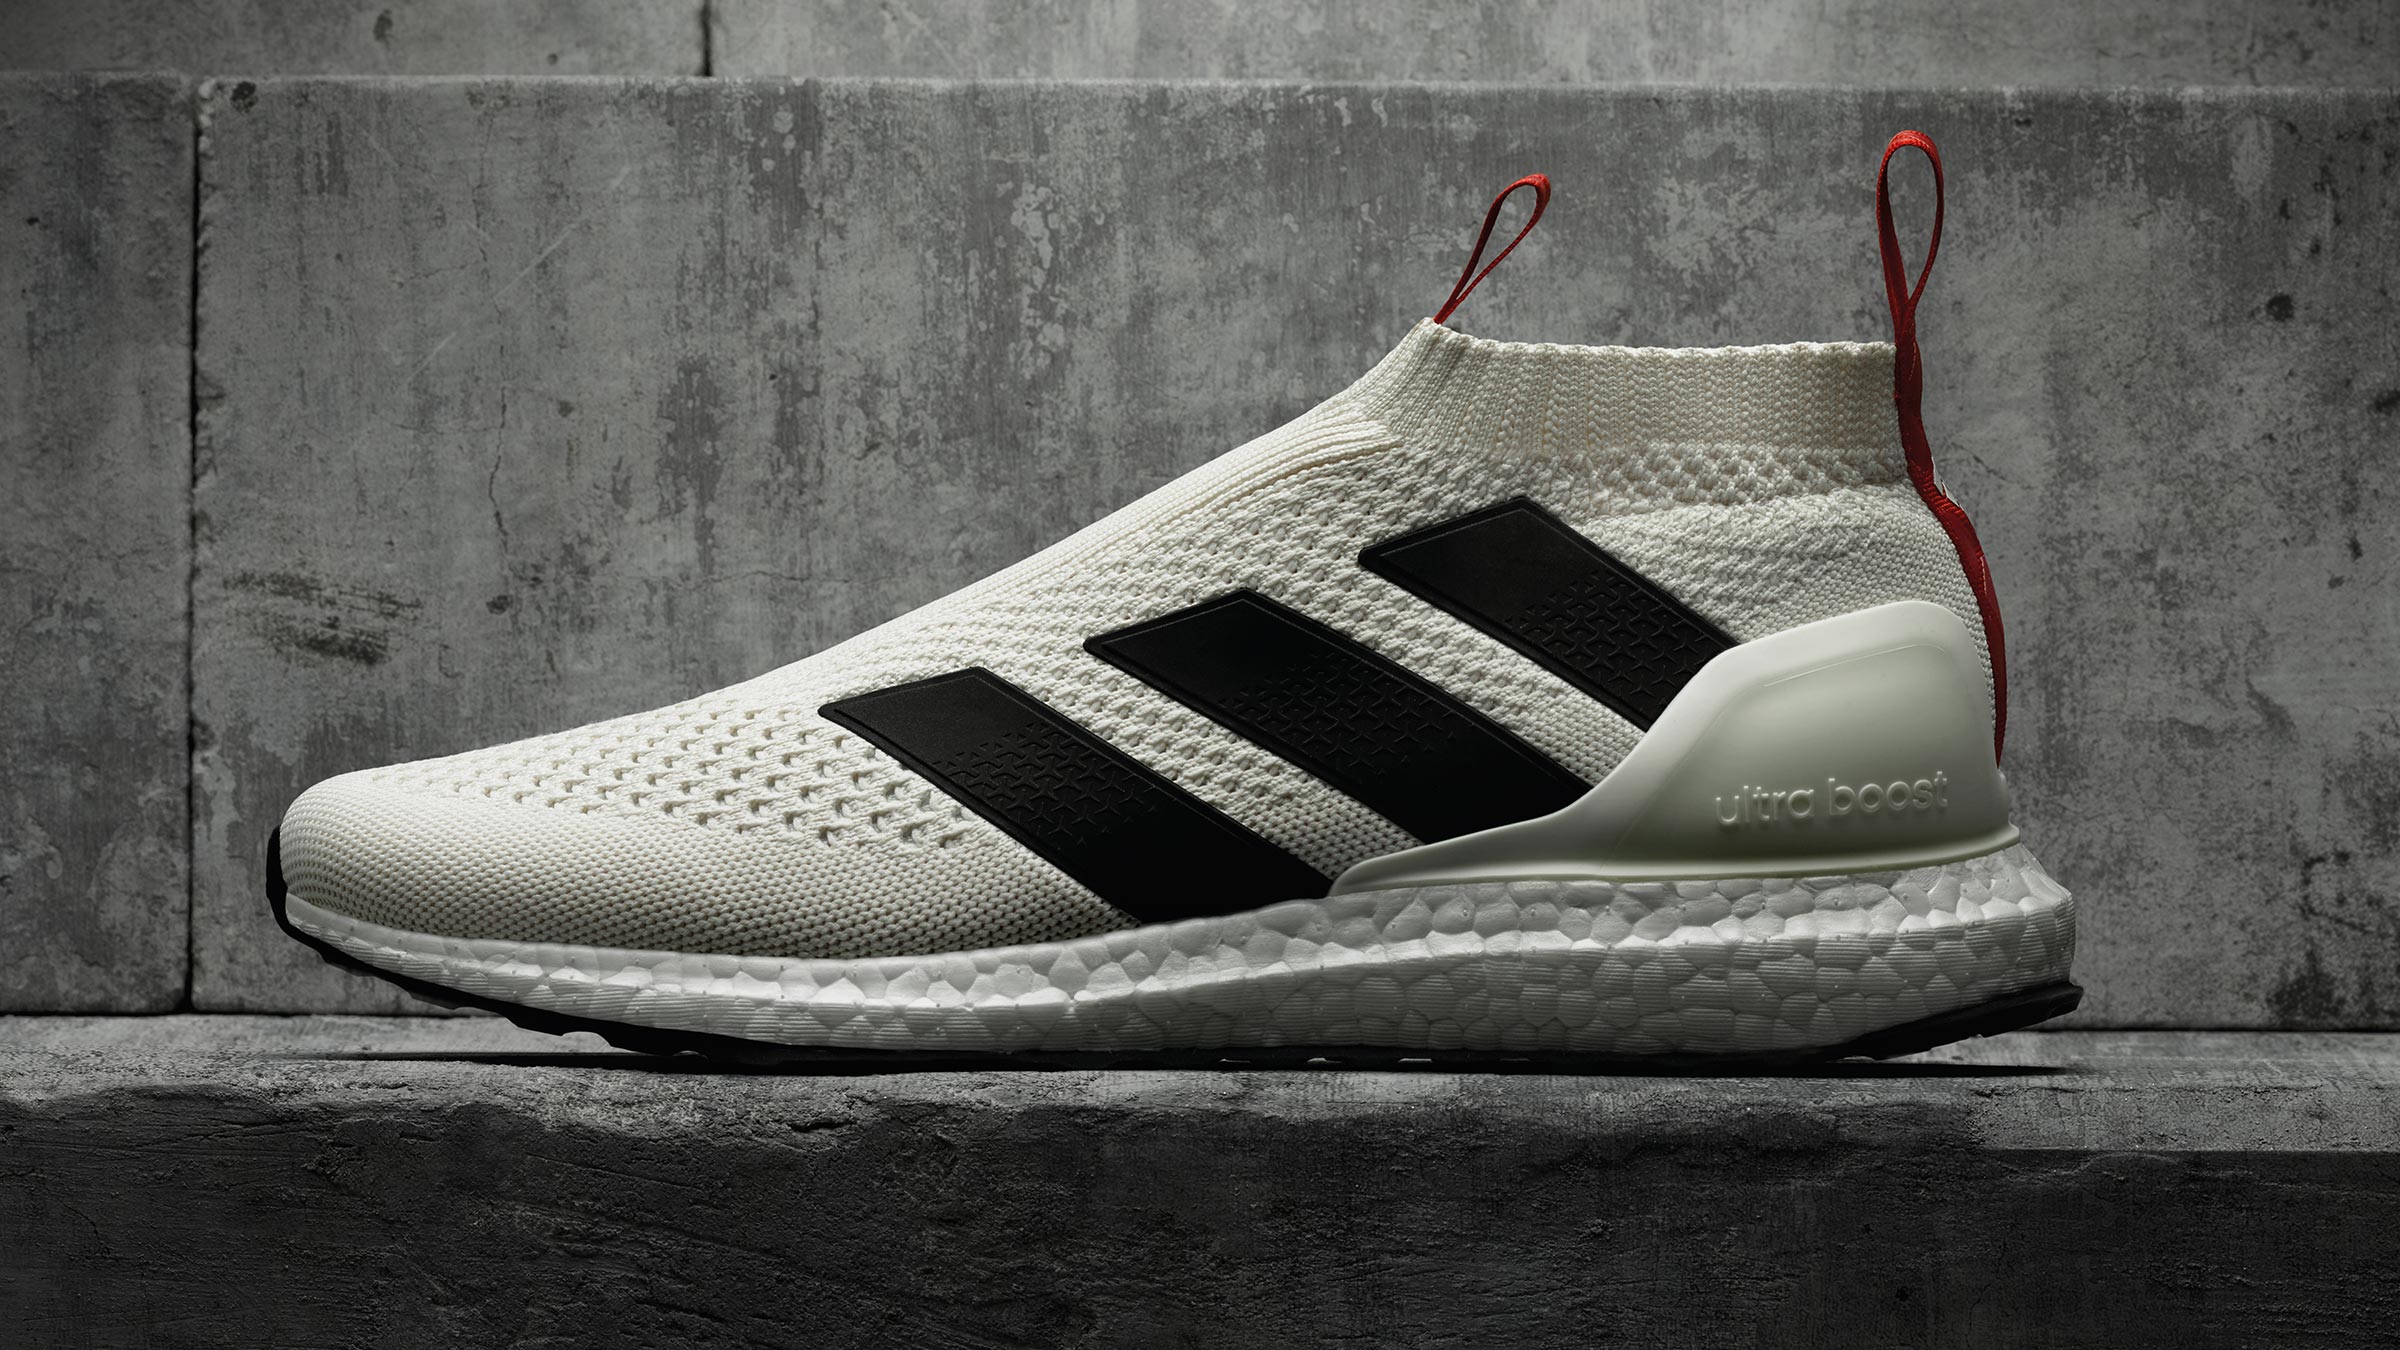 Soldes > adidas ultra boost ace 16 > en stock